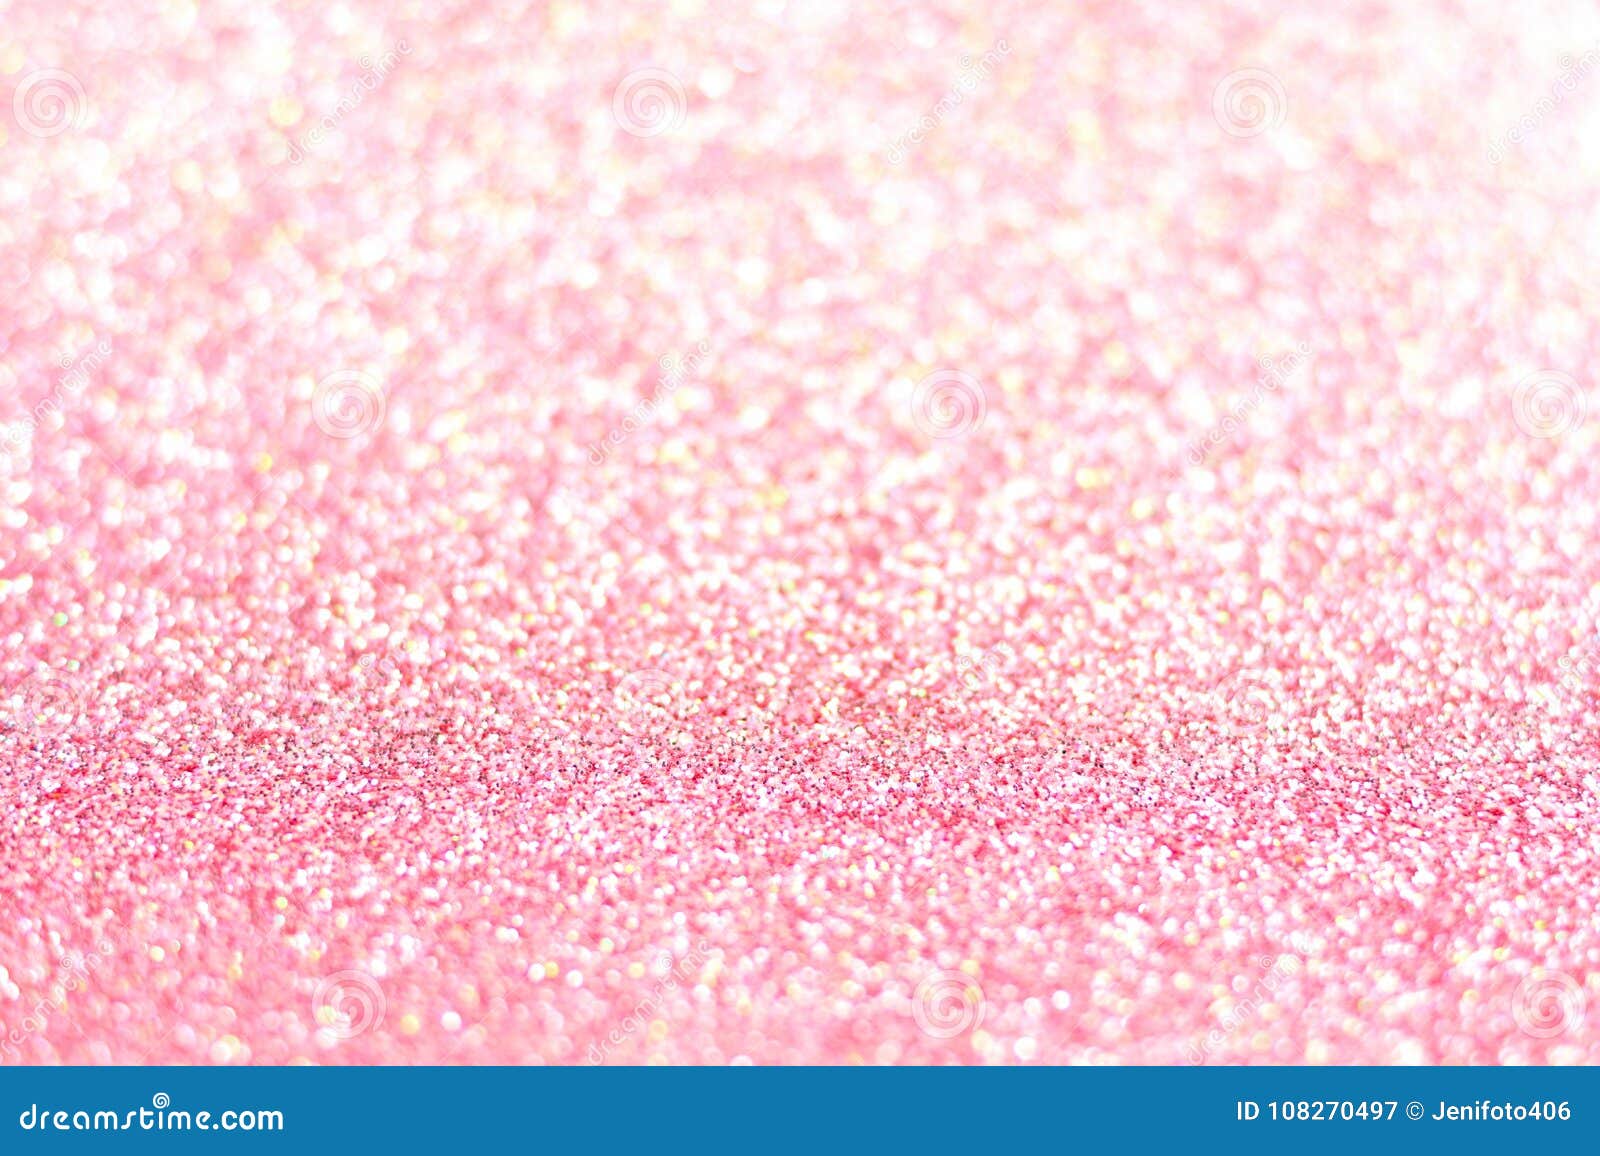 pink glitter background with selective focus